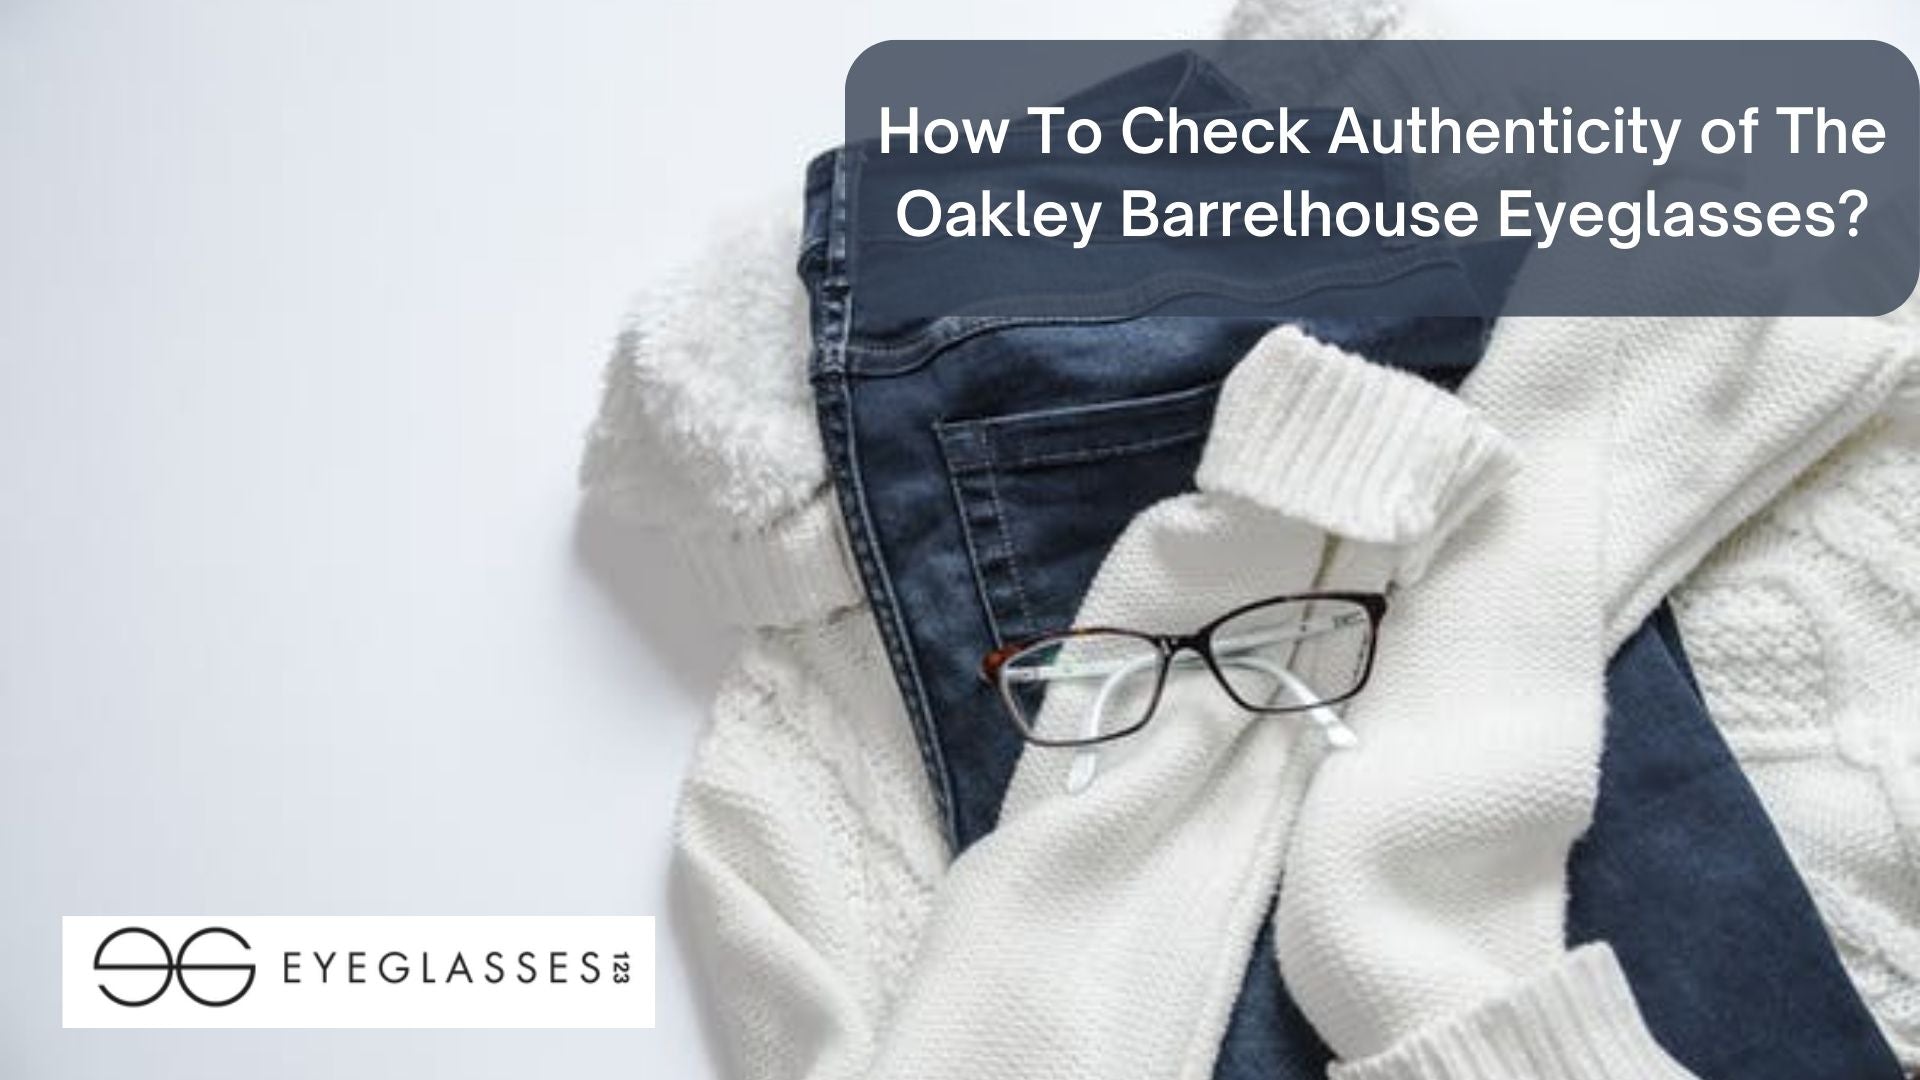 How To Check Authenticity of The Oakley Barrelhouse Eyeglasses?